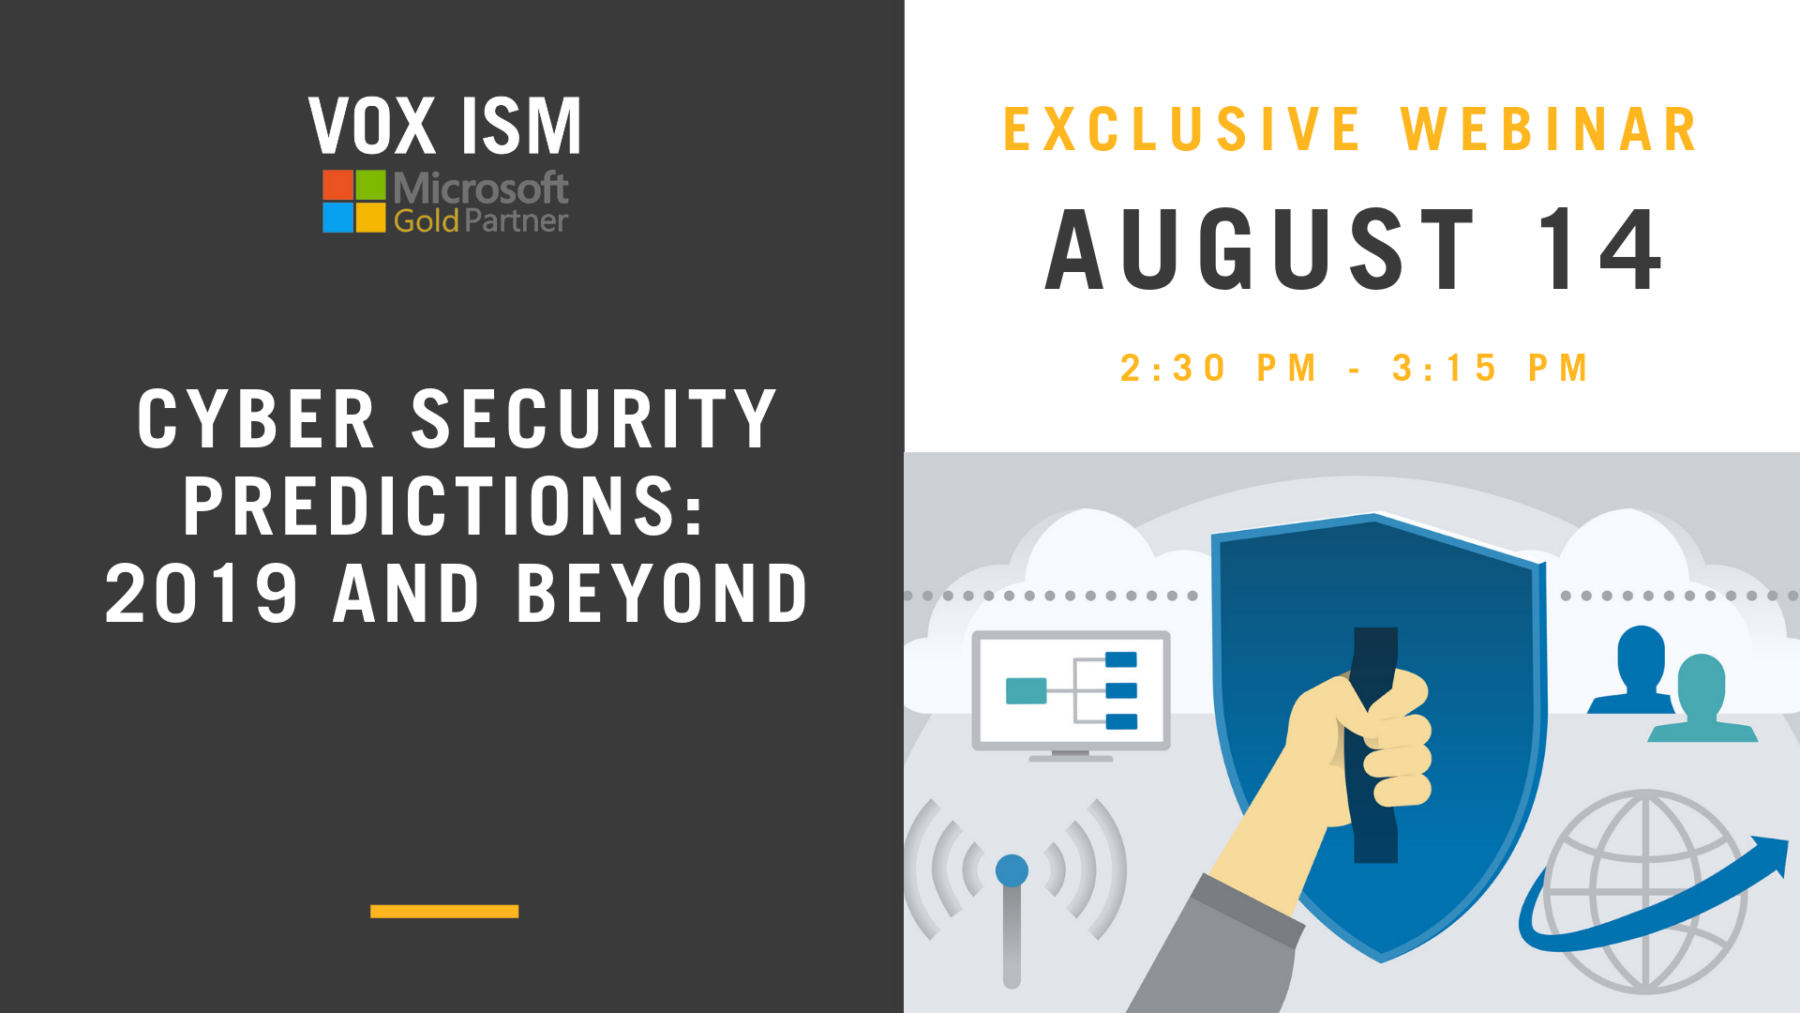 Cyber Security Predictions: 2019 and Beyond - August 14 - Webinar - VOX ISM